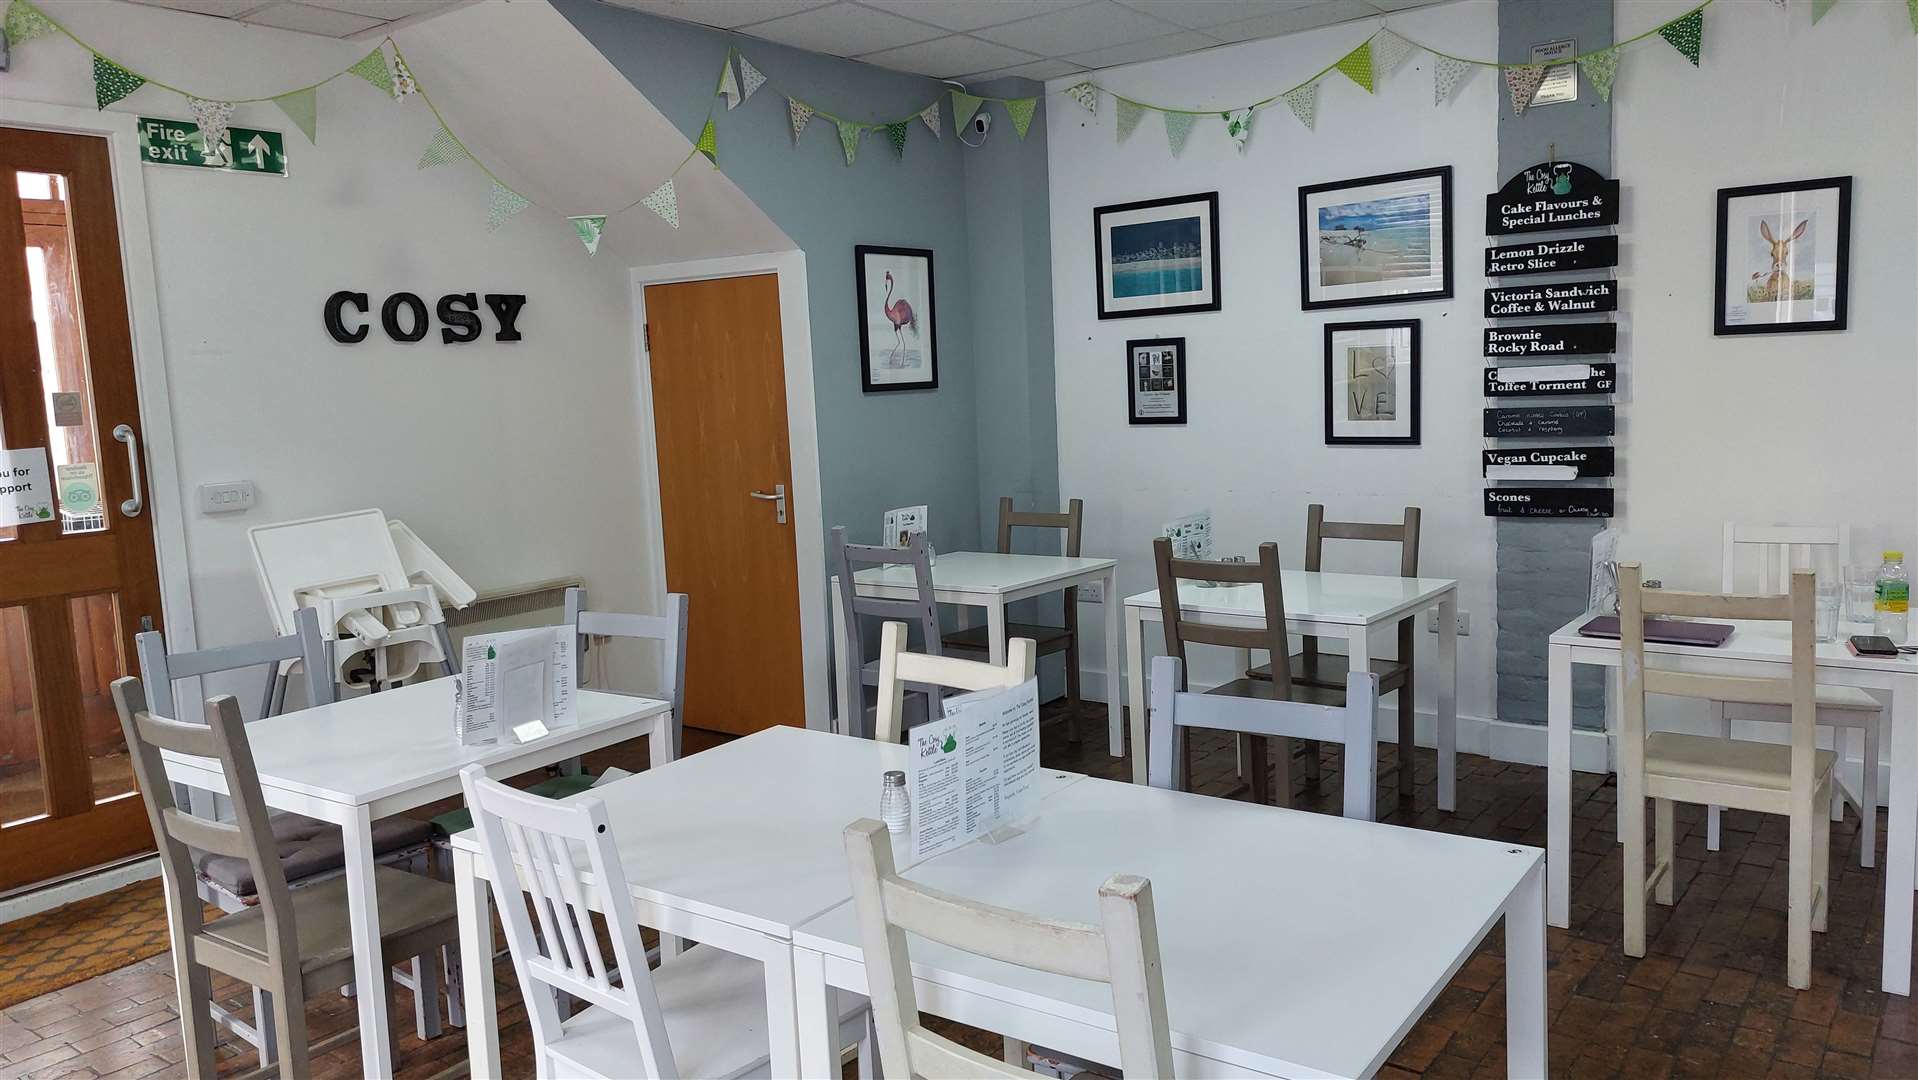 The tearoom also host prosecco and pizza nights